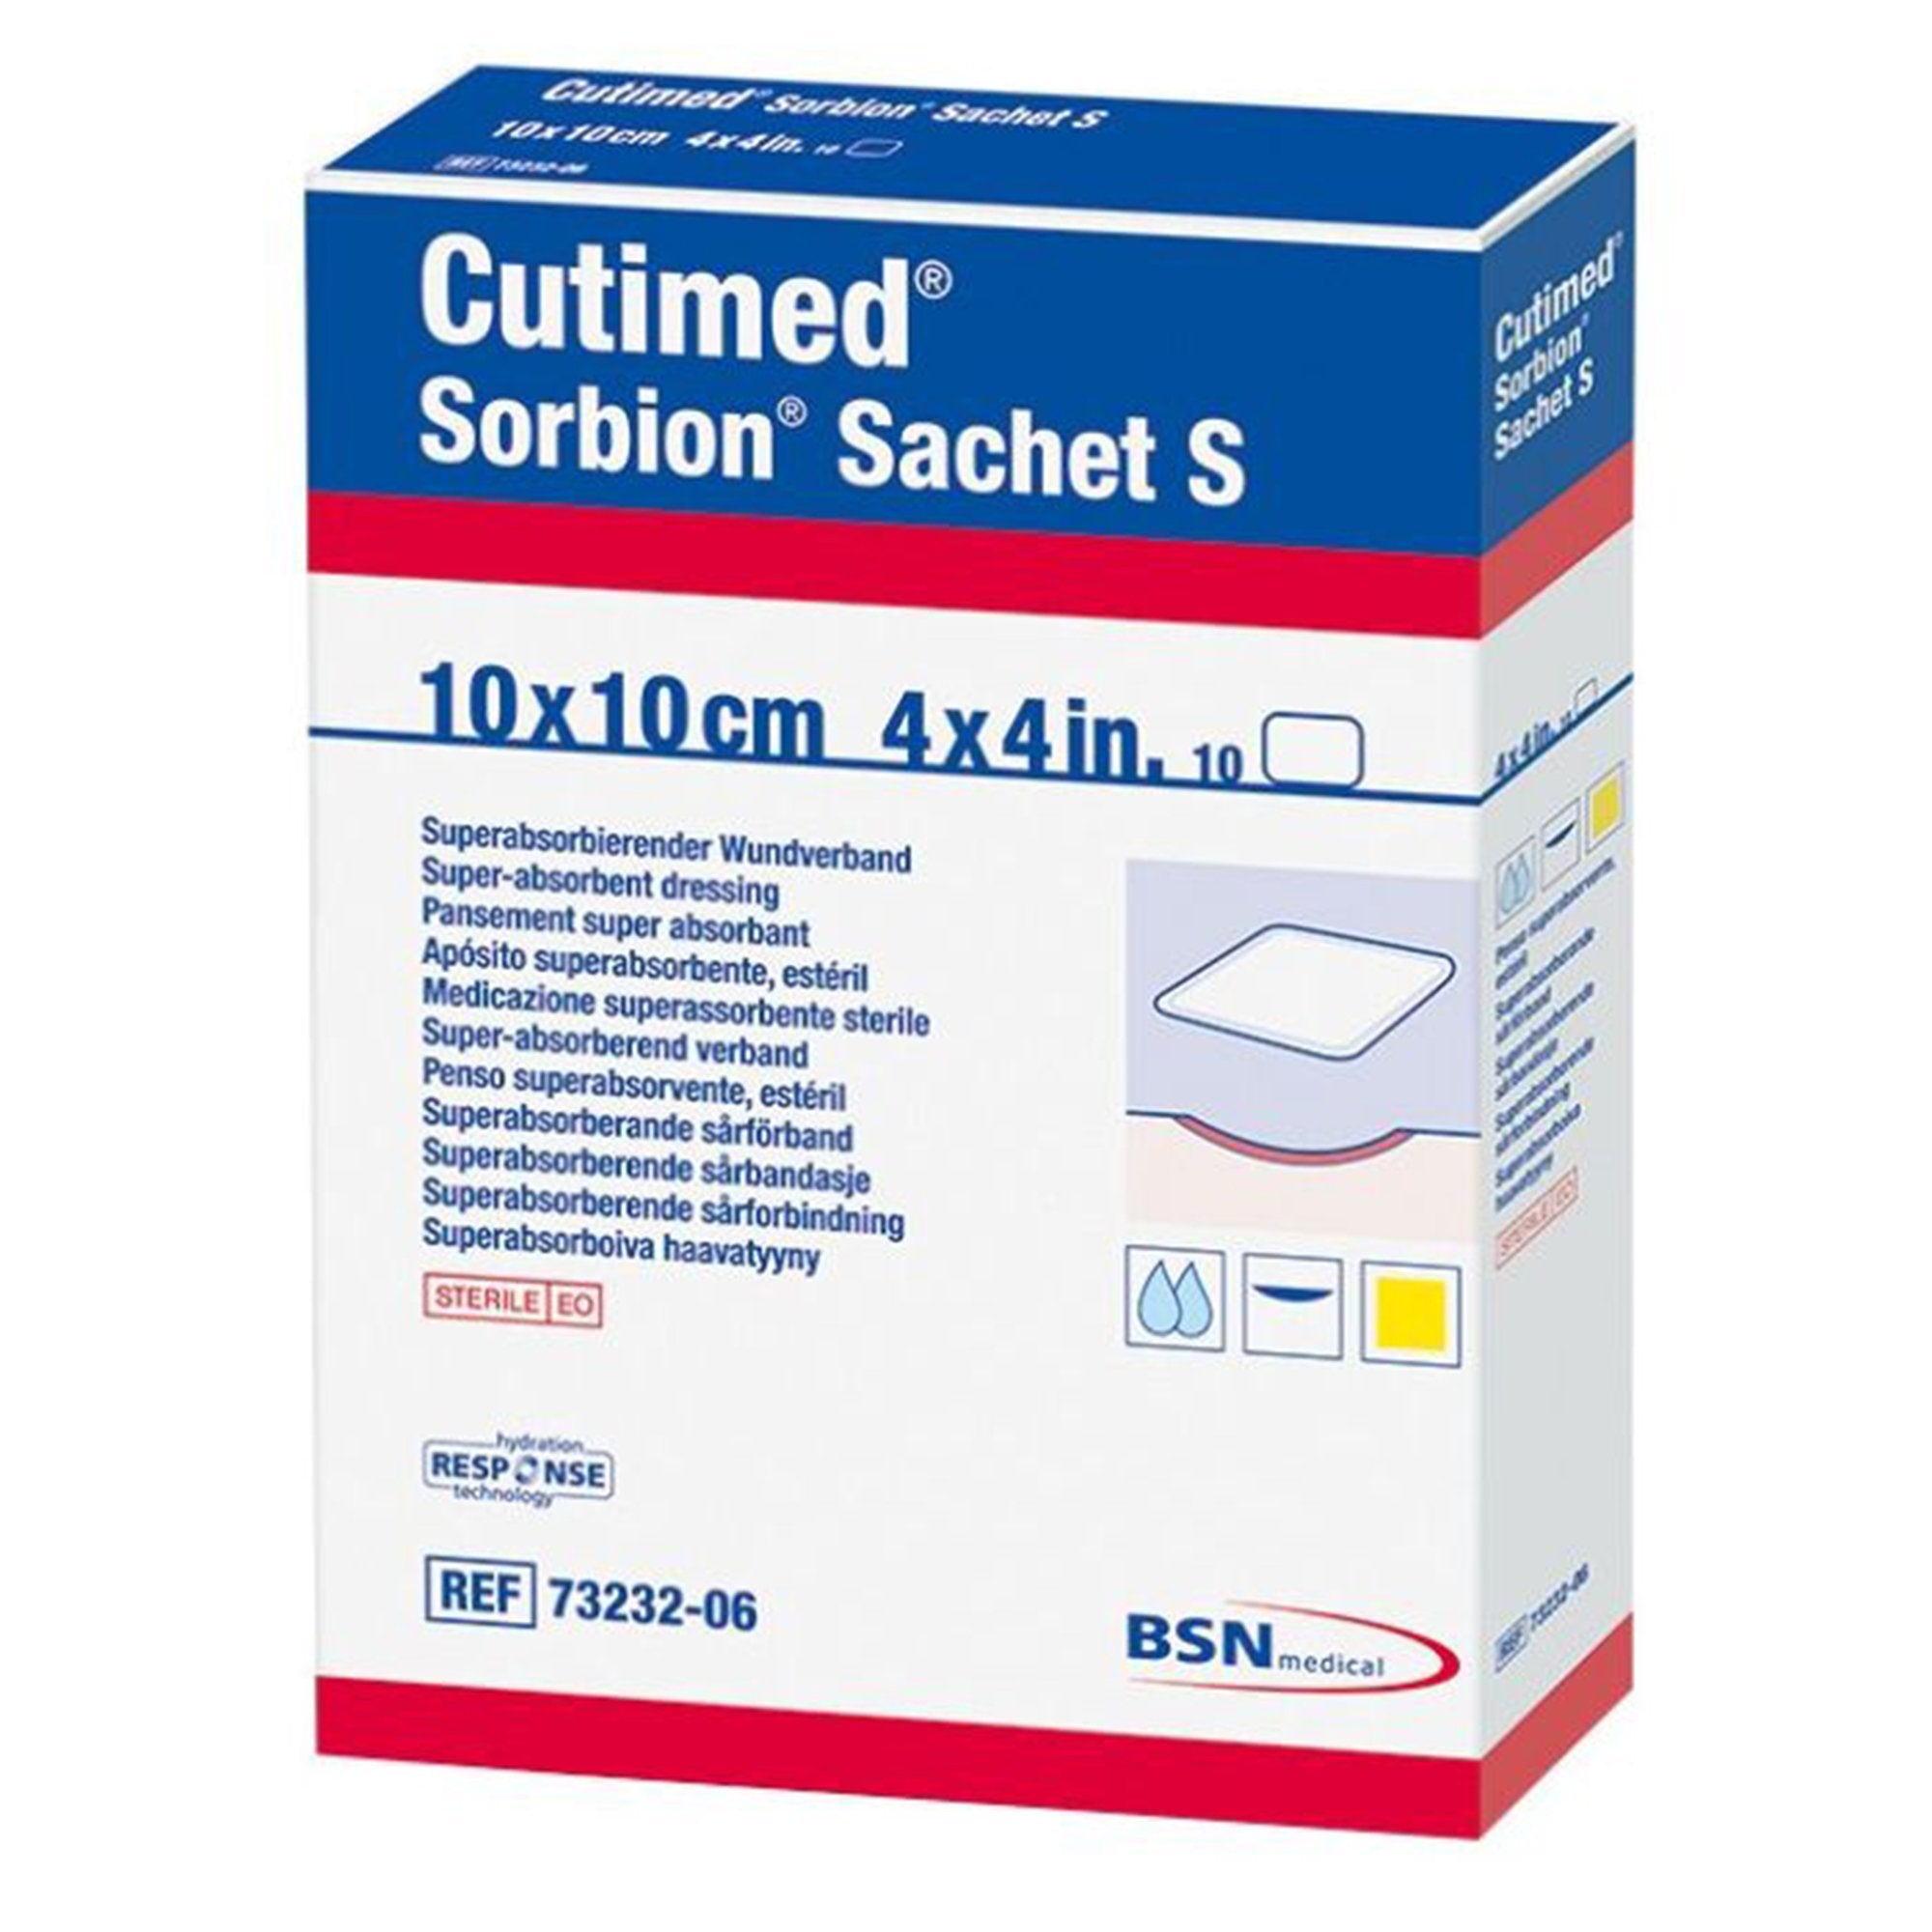 Wound Dressing Cutimed® Sorbion® Sachet S 4 X 4 Inch Square